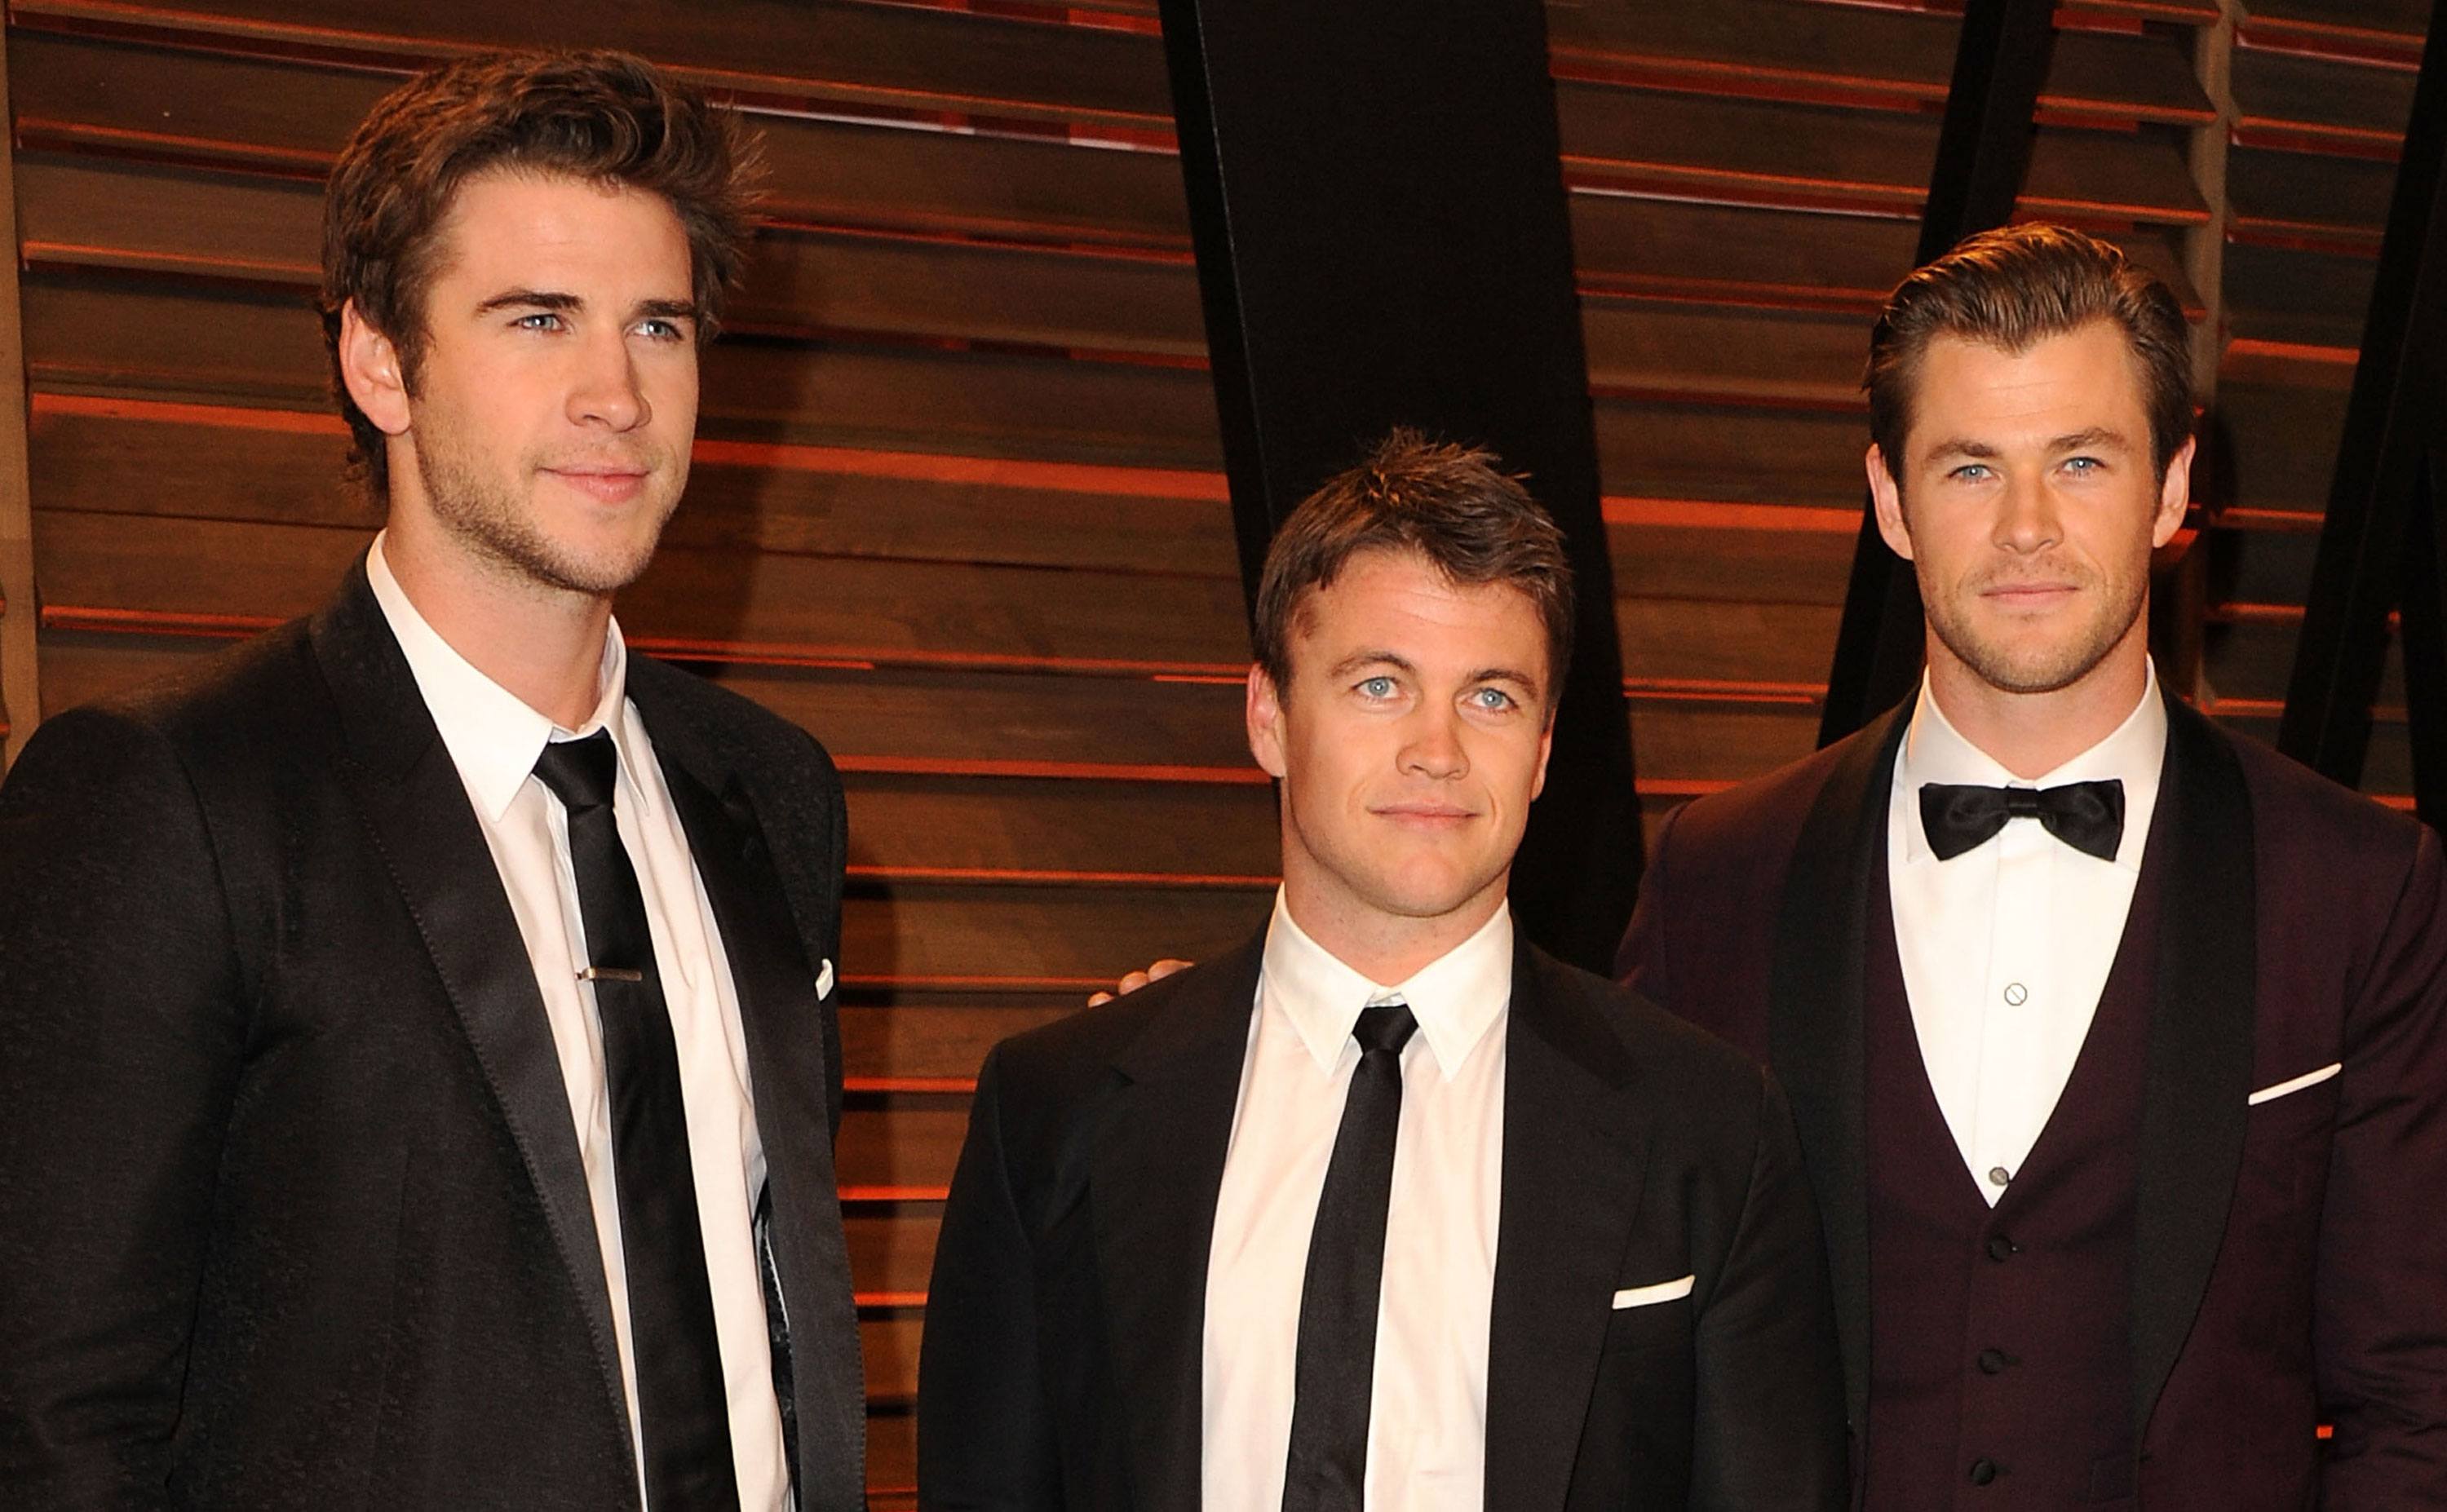 Liam, Luke, and Chris attend an event.